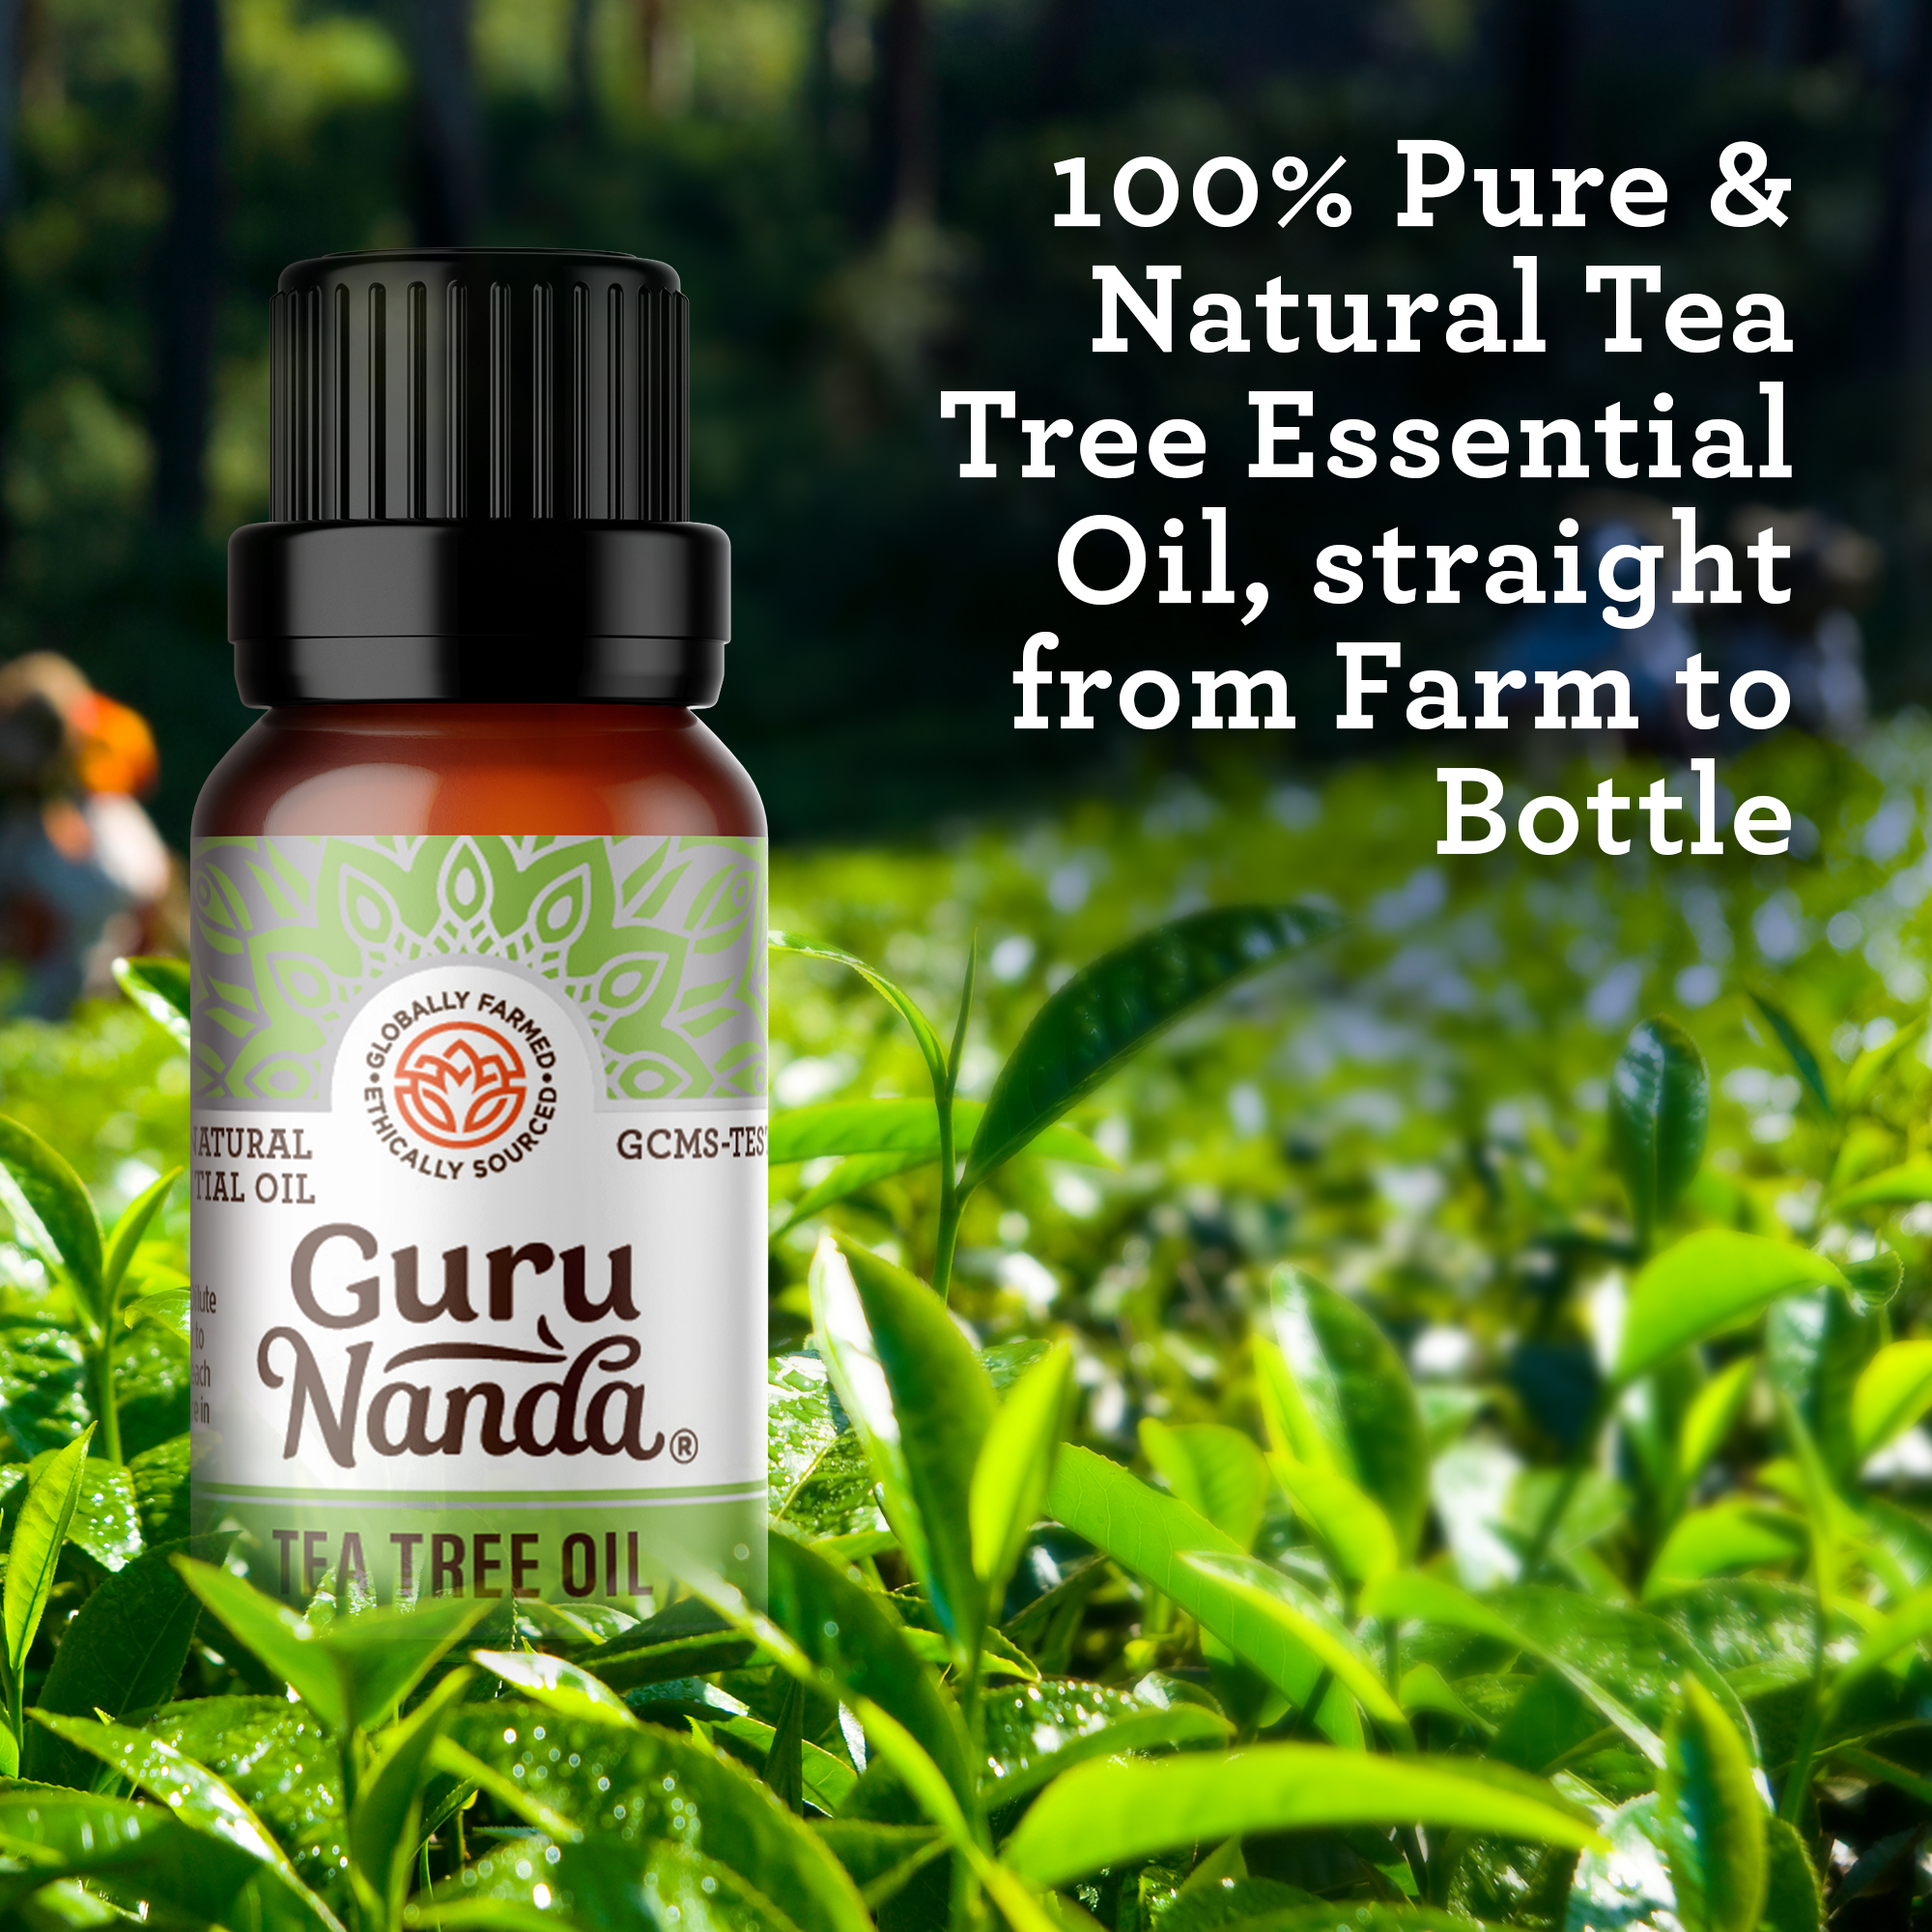 GuruNanda 100% Pure & Natural Tea Tree Essential Oil for Aromatherapy & Diffuser - 15ml - image 4 of 8